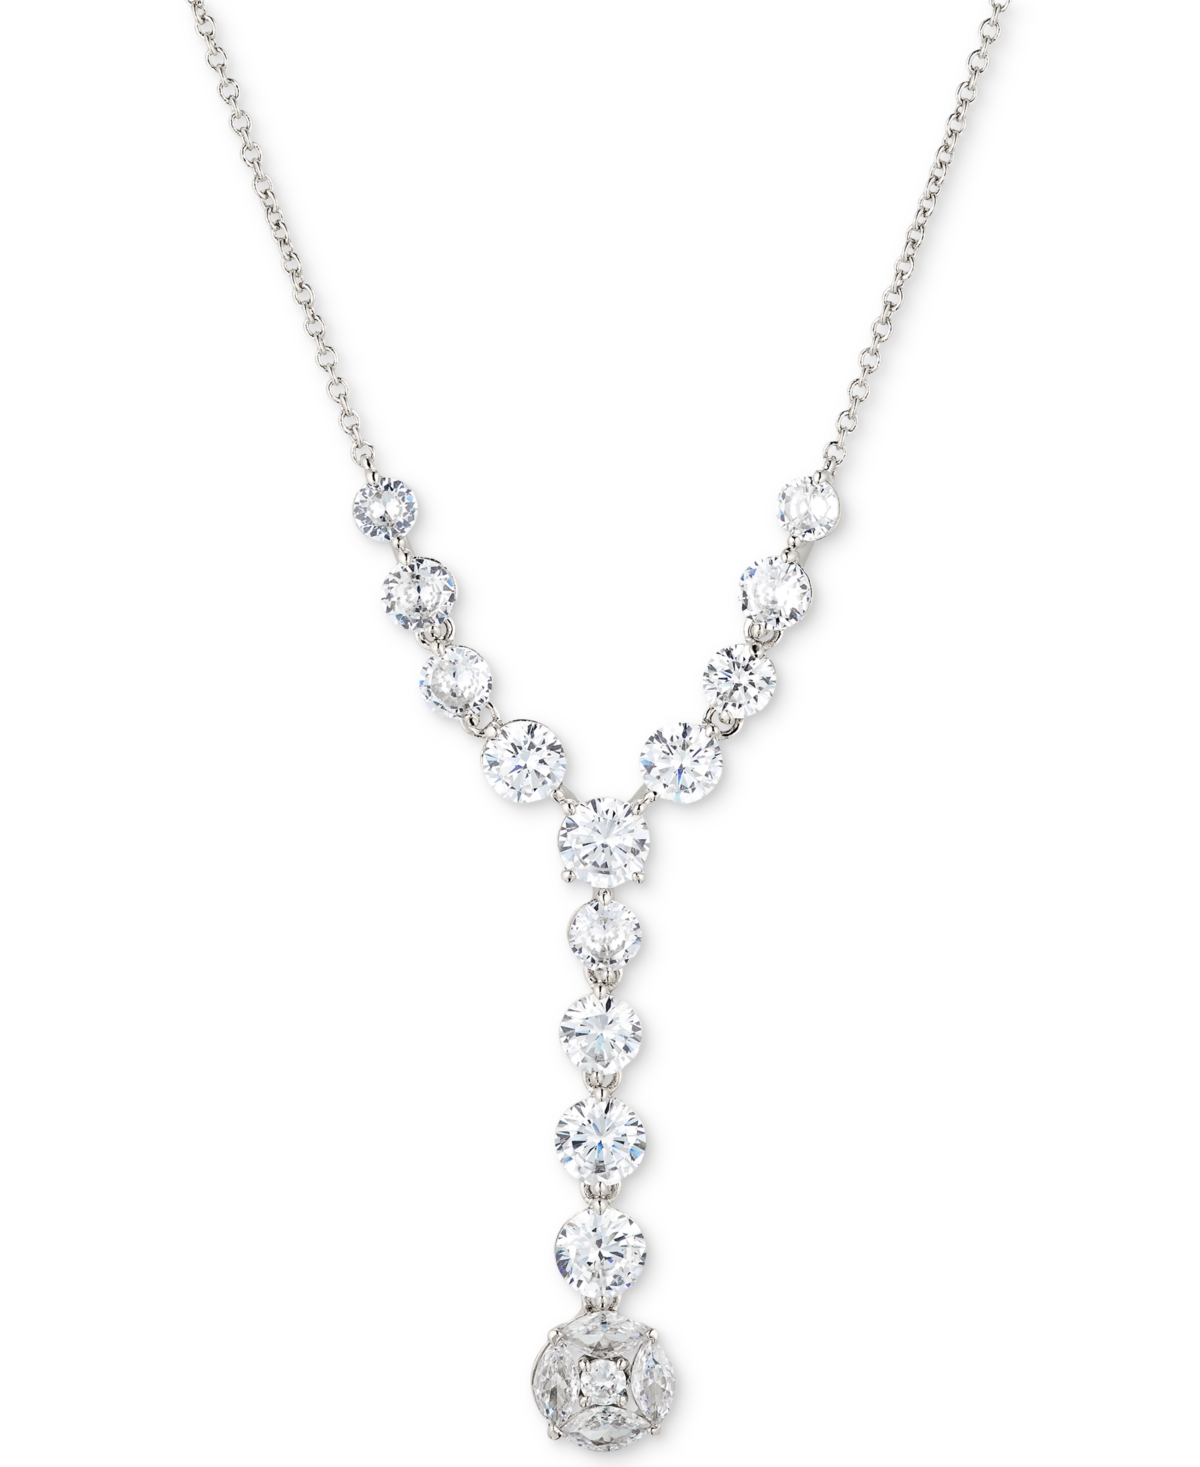 Silver-Tone Cubic Zirconia Lariat Necklace, 16" + 3" extender, Created for Macy's - Silver